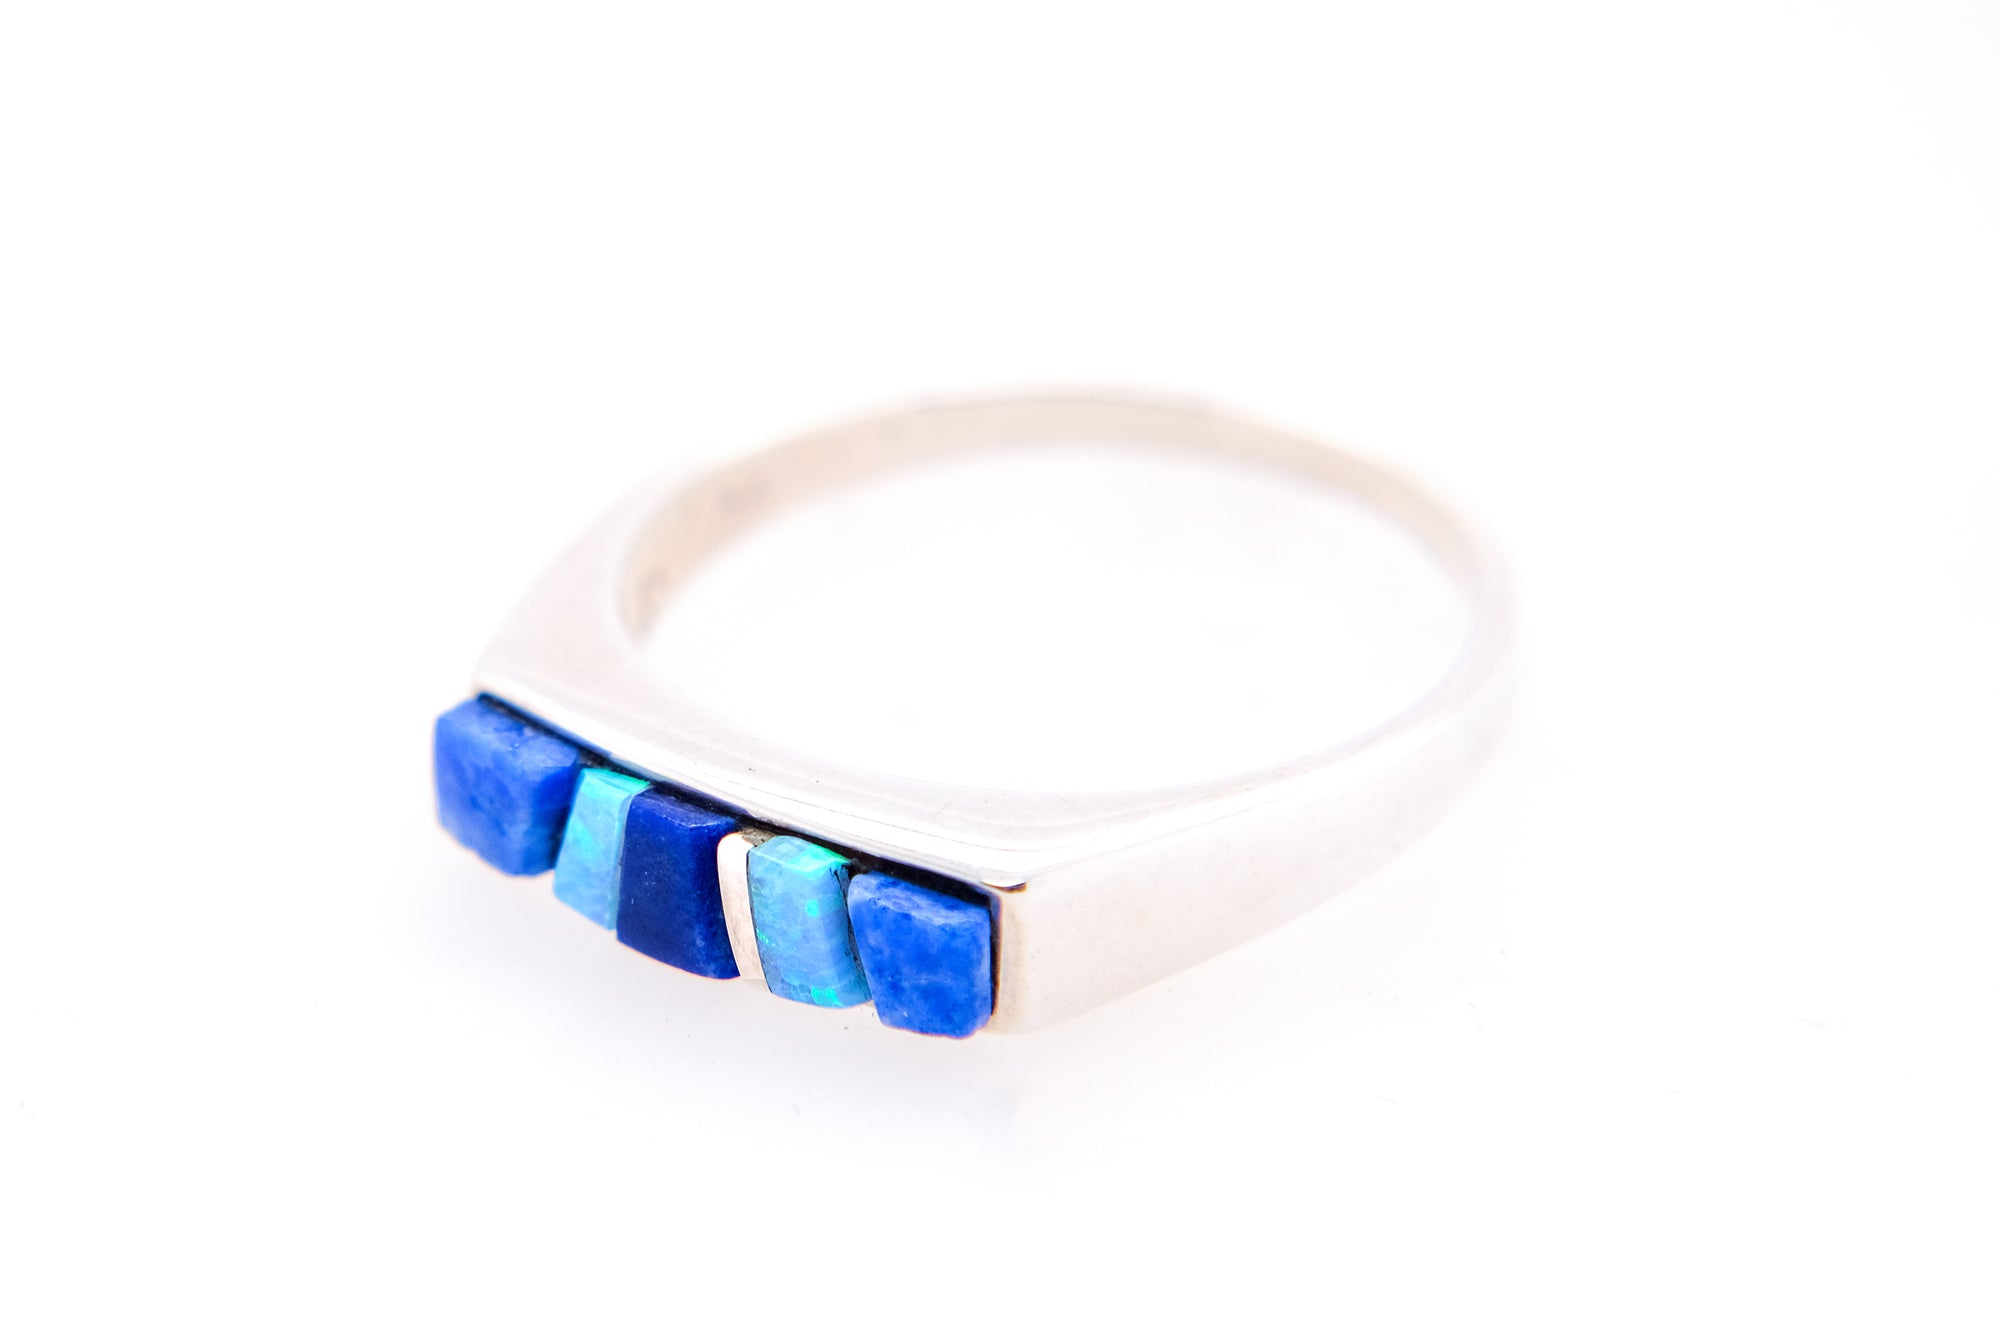 David Rosales Square Blue Sky Ring - Native American Jewelry